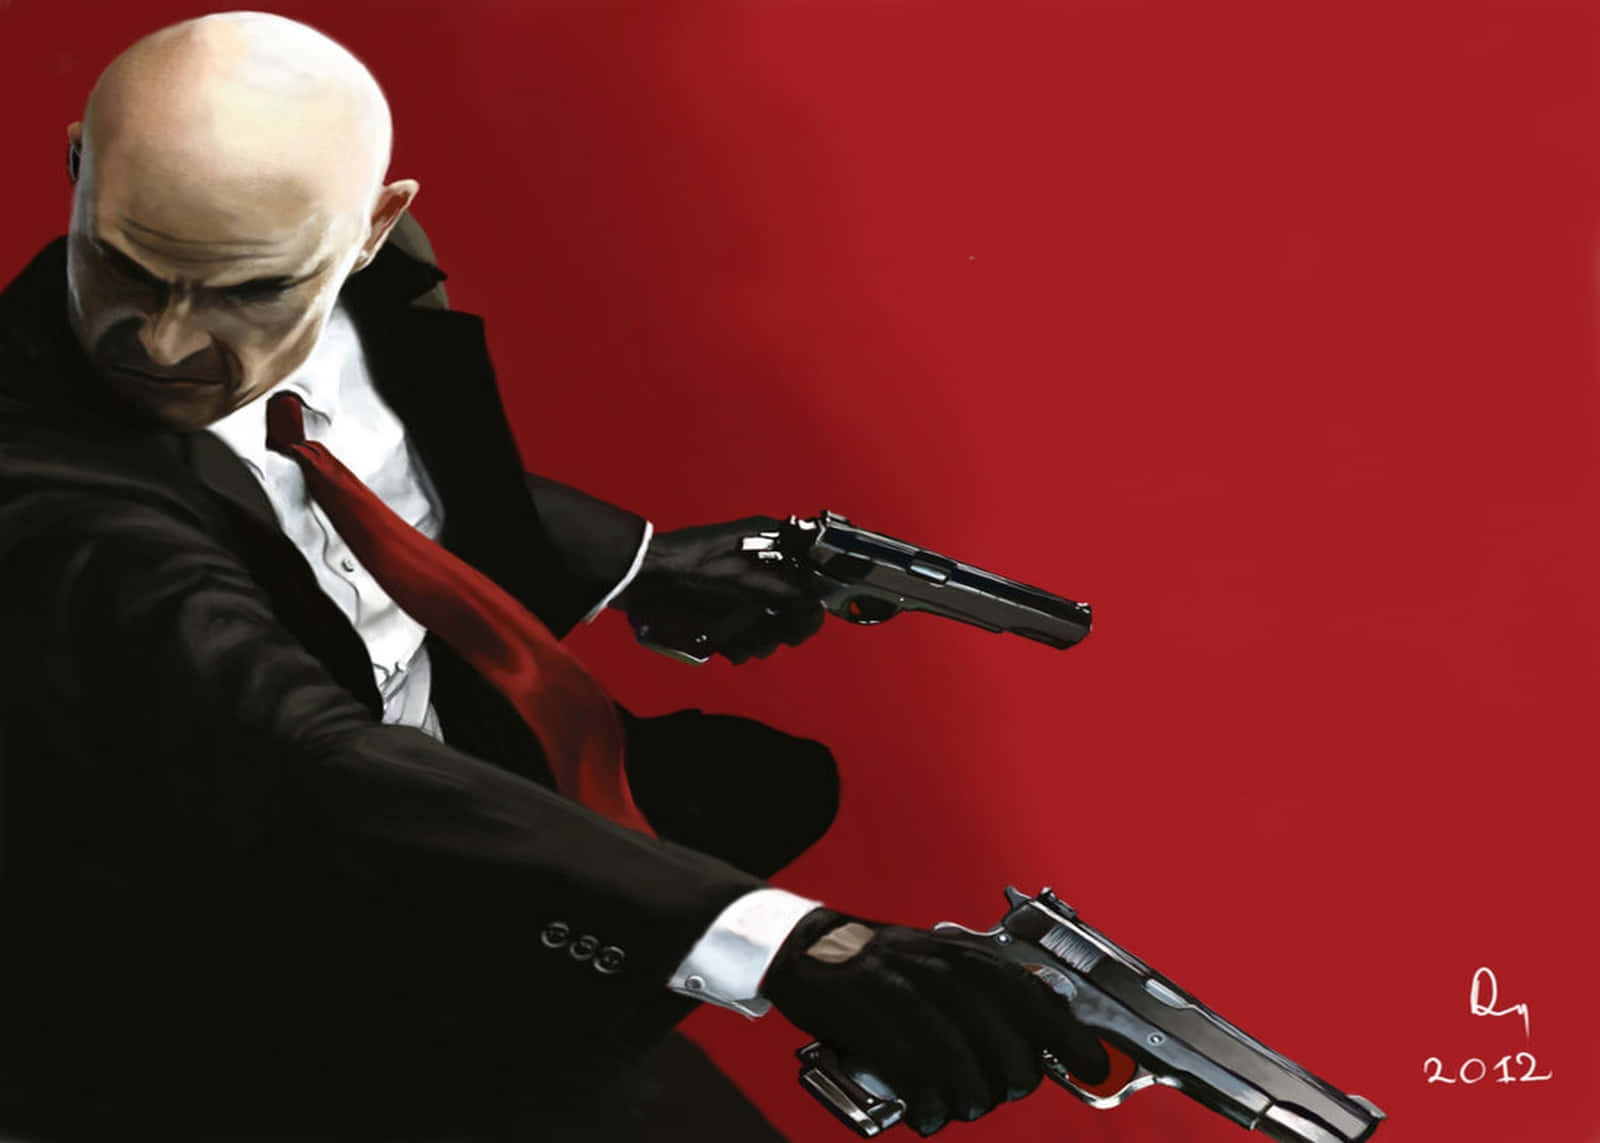 In the World of Hitman Absolution, Agent 47 is the ultimate assassin